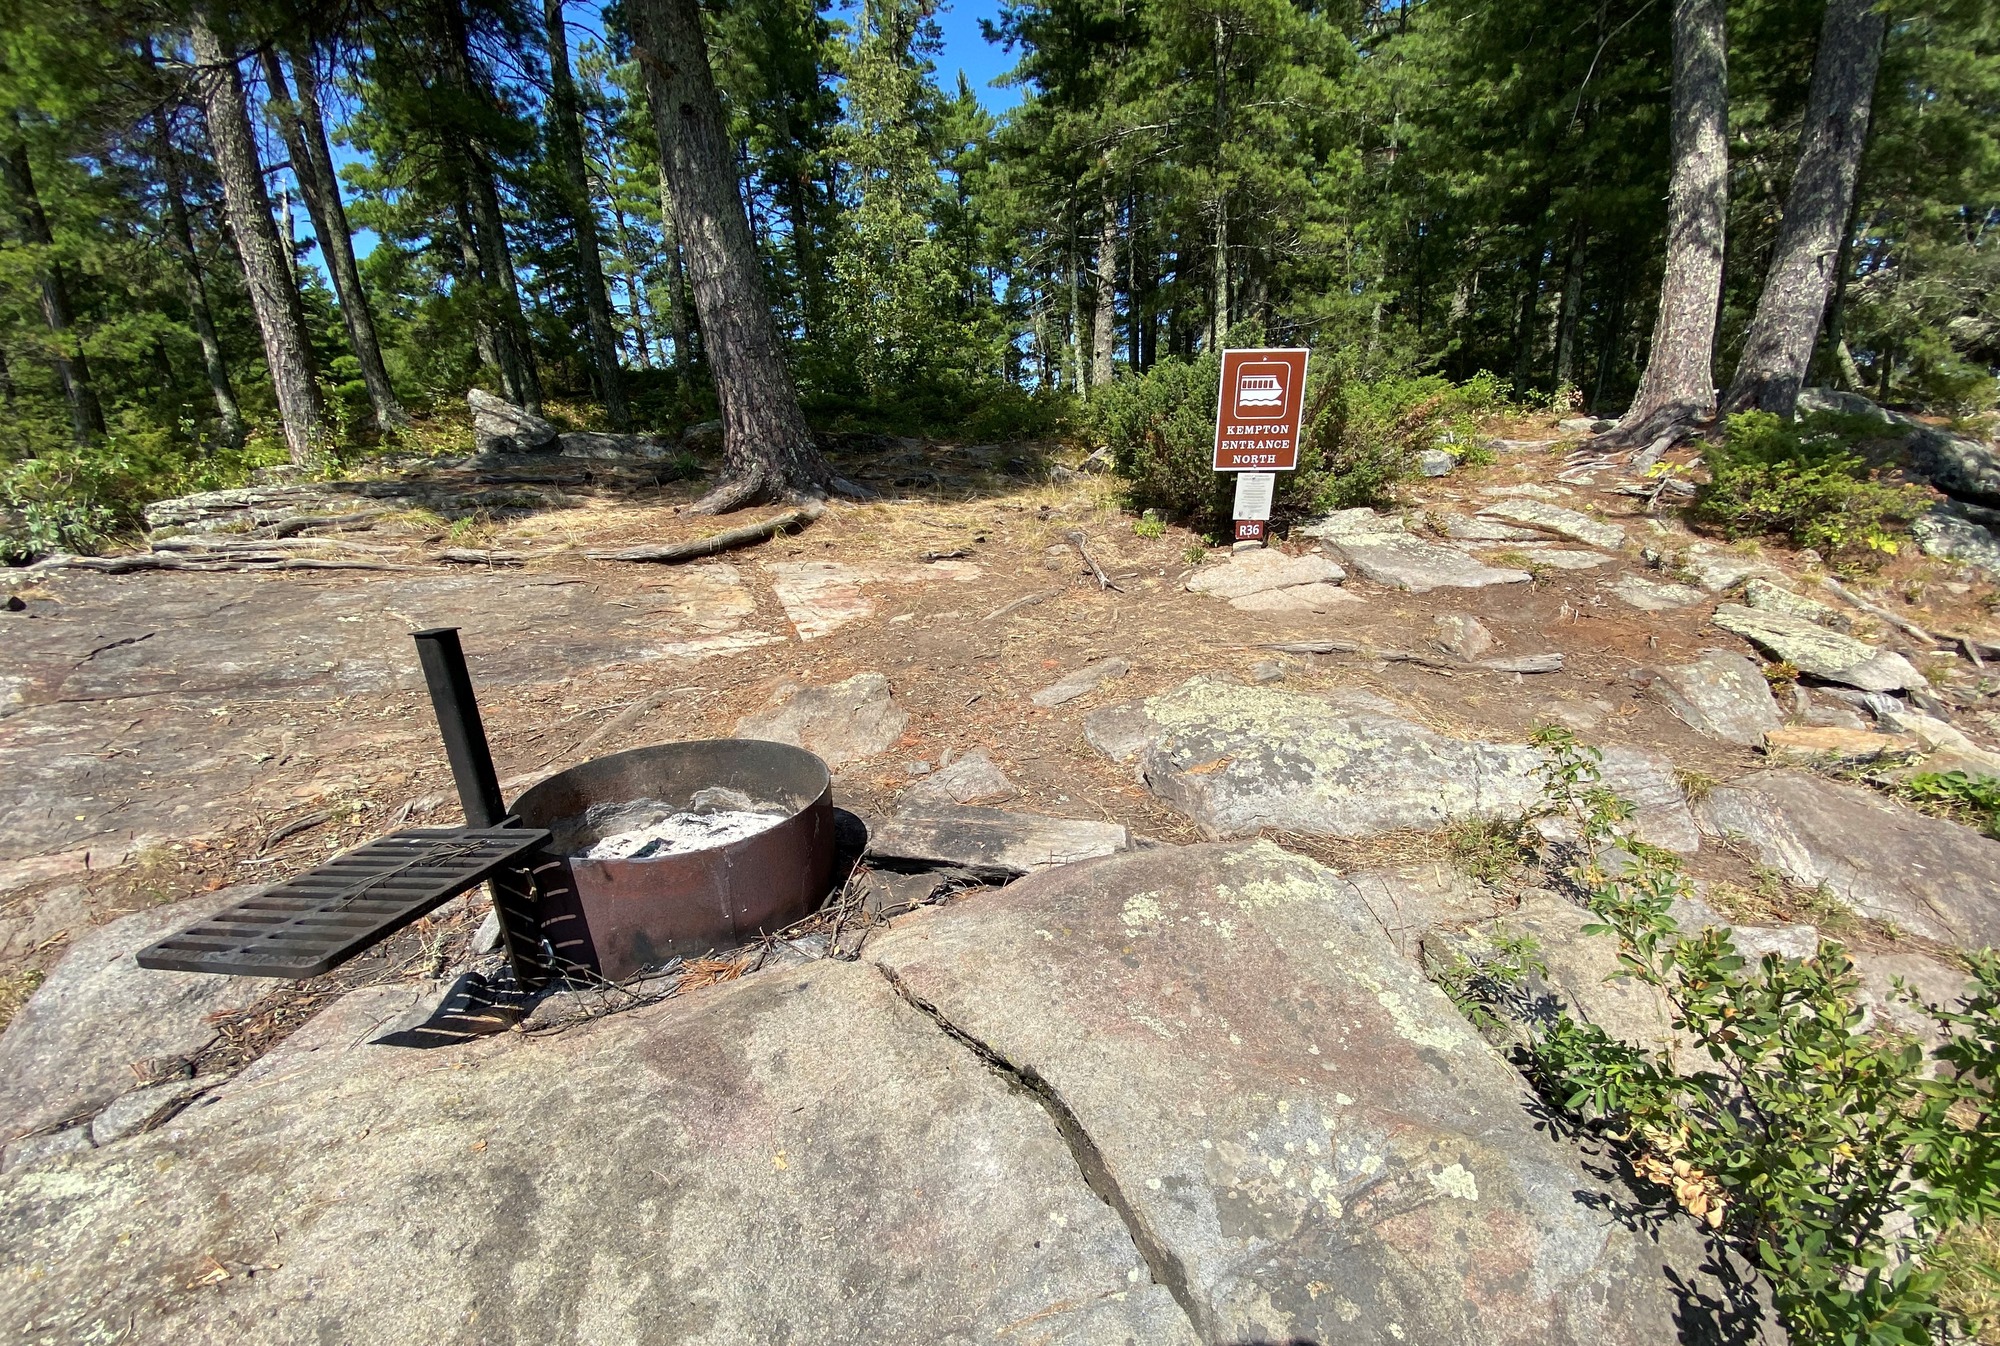 View of the houseboat site core of the houseboat sign and camp fire ring on rocky out cropping. Large pine trees are in the background surrounding the site.